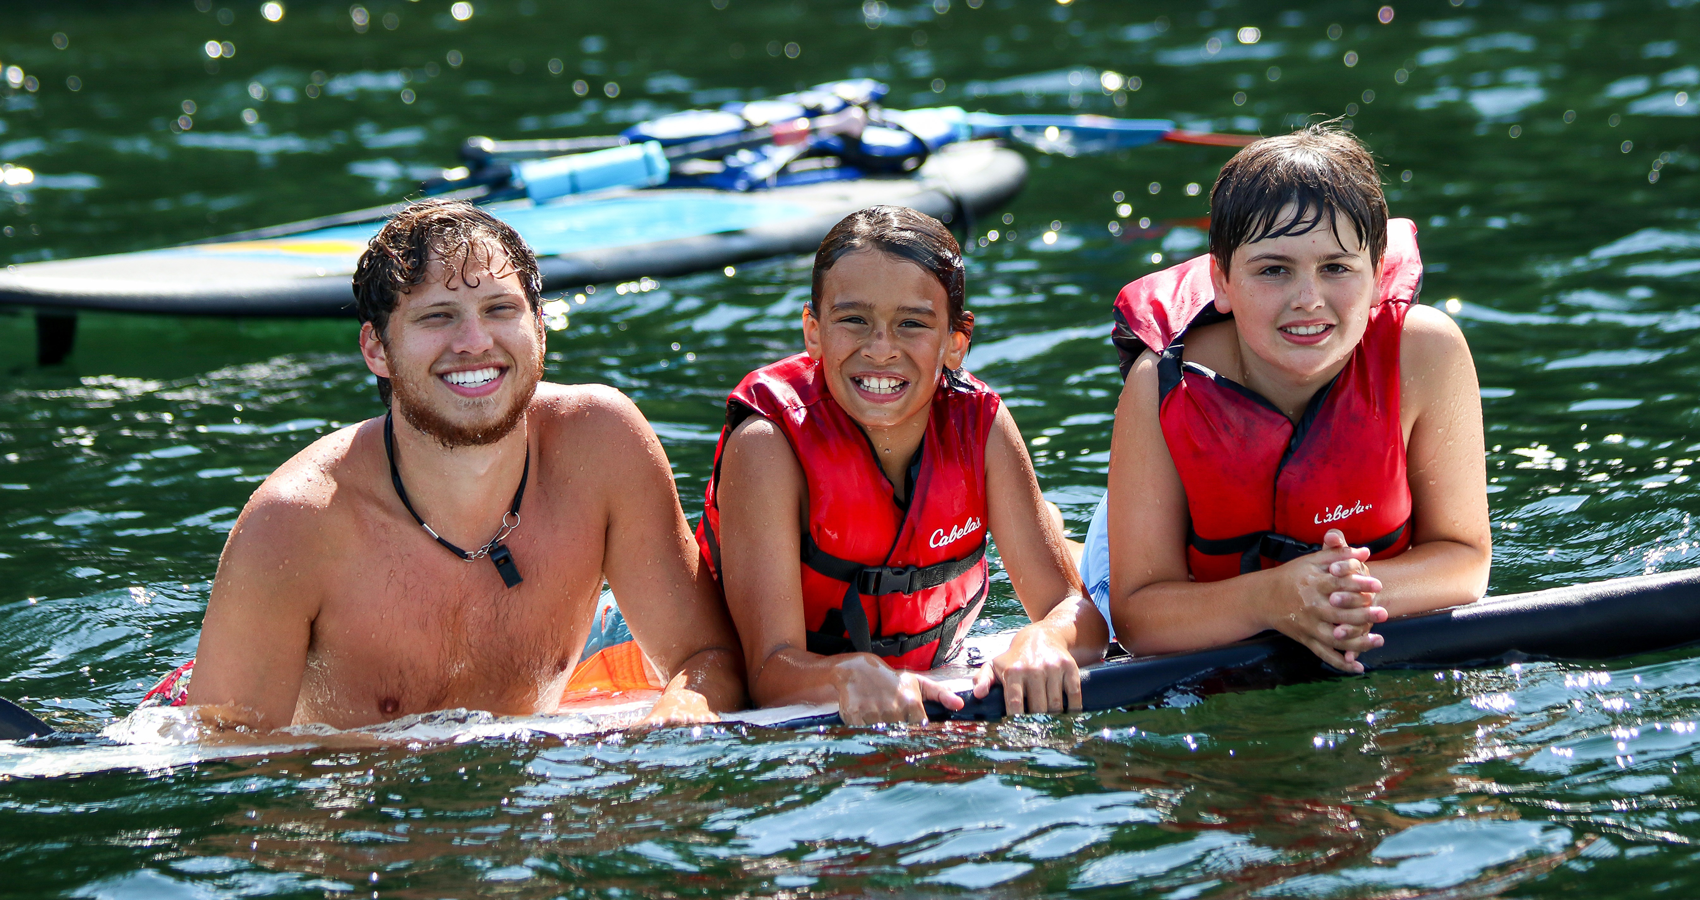 Counselor with campers in water